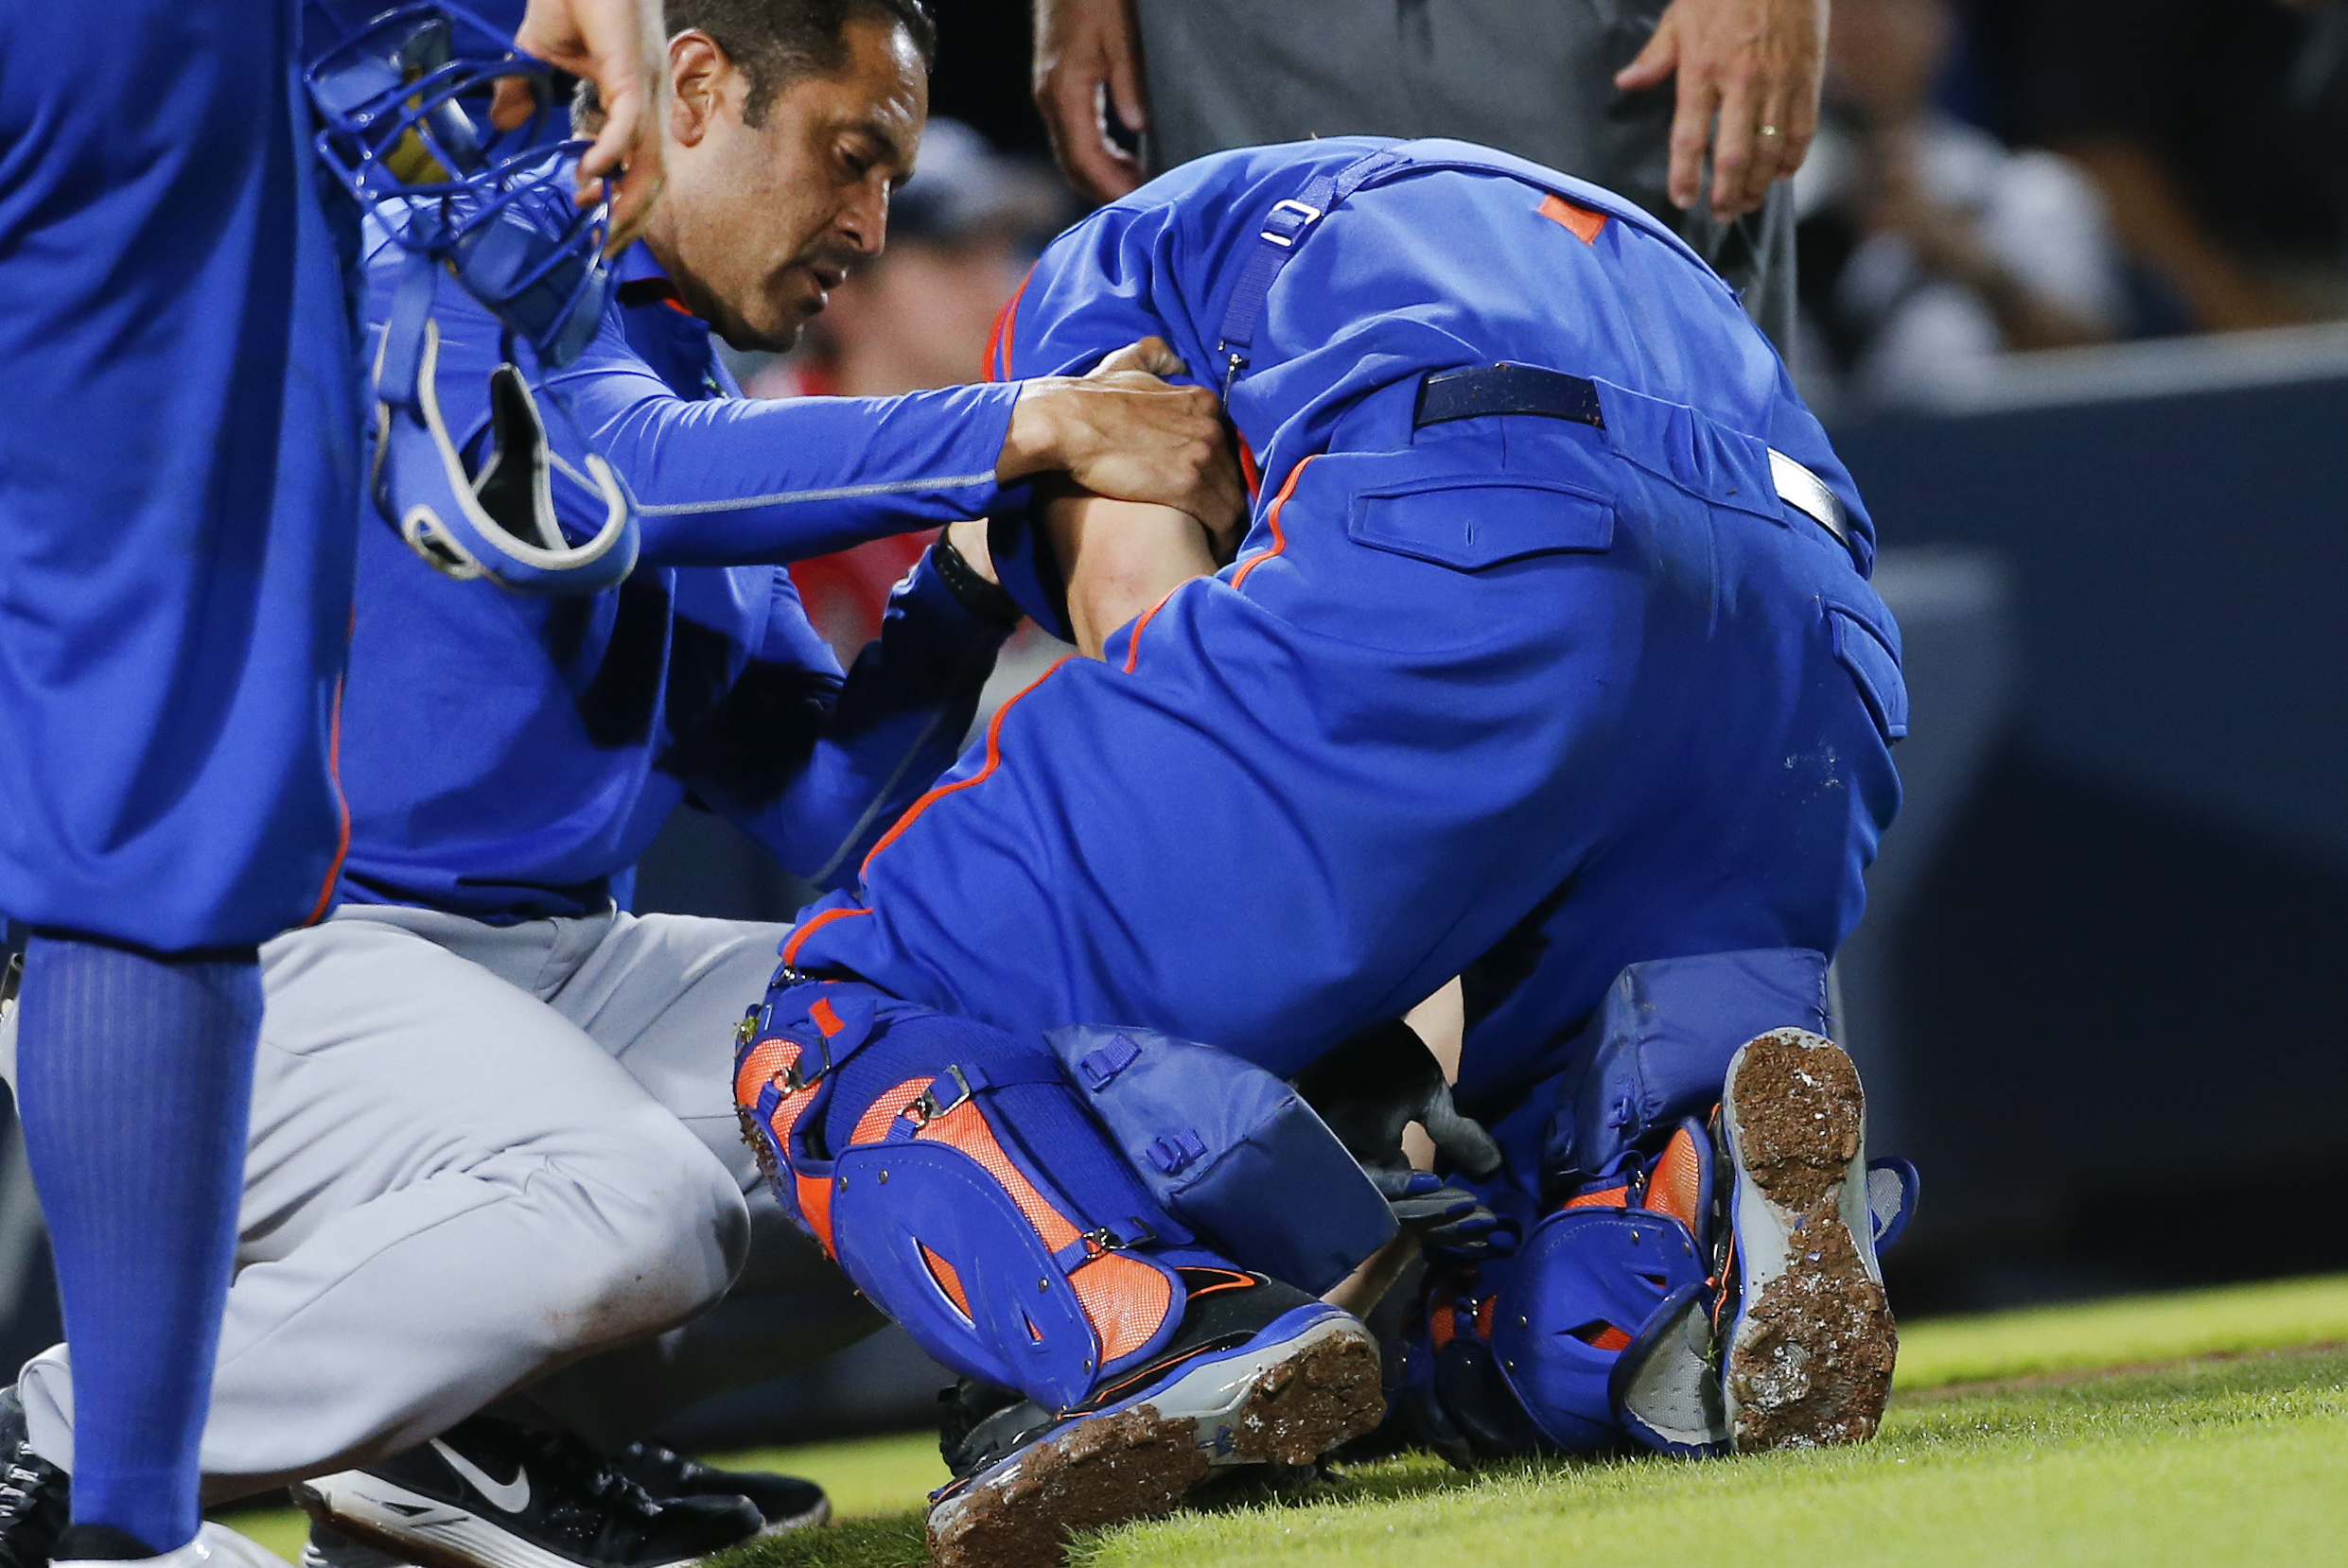 Edwin Díaz injury update: Mets explain why it's 'too risky' to have closer  pitch in 2023 after knee surgery 